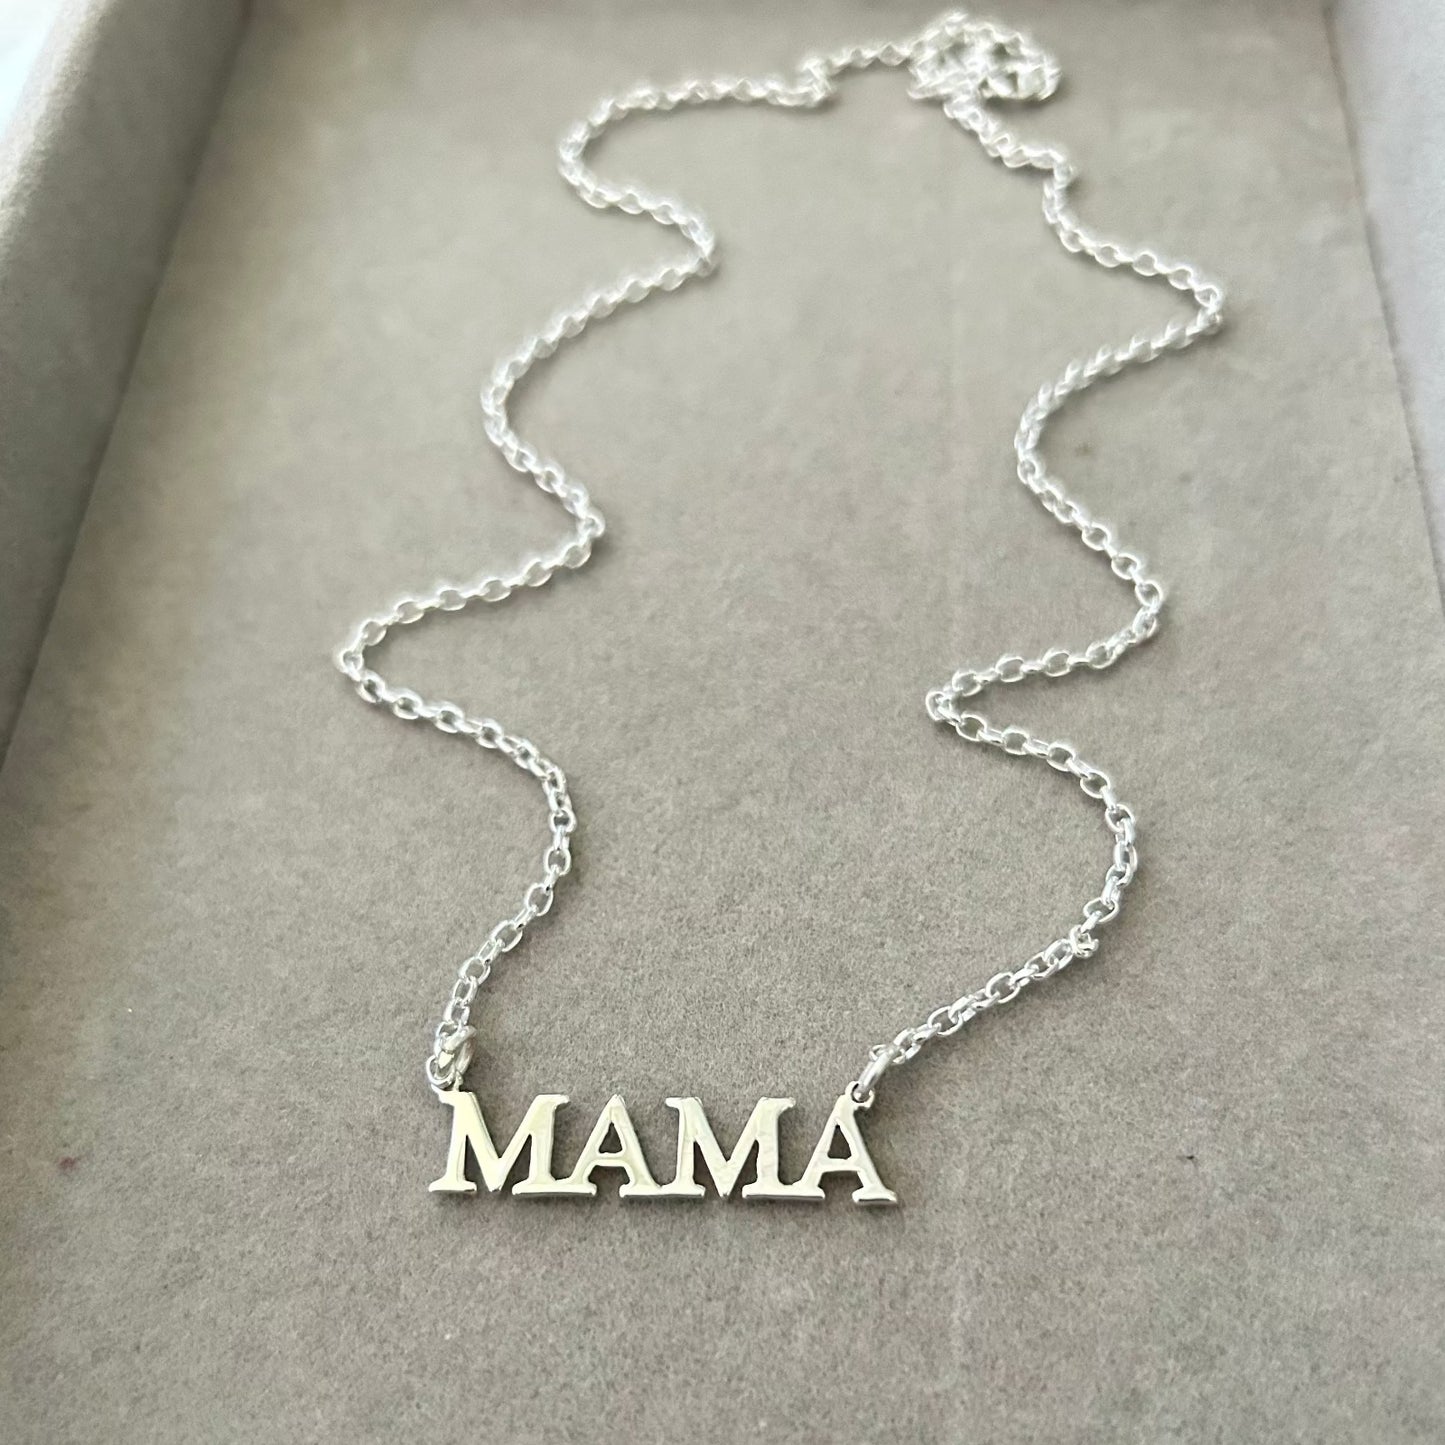 MAMA Necklace in 925 Sterling Silver